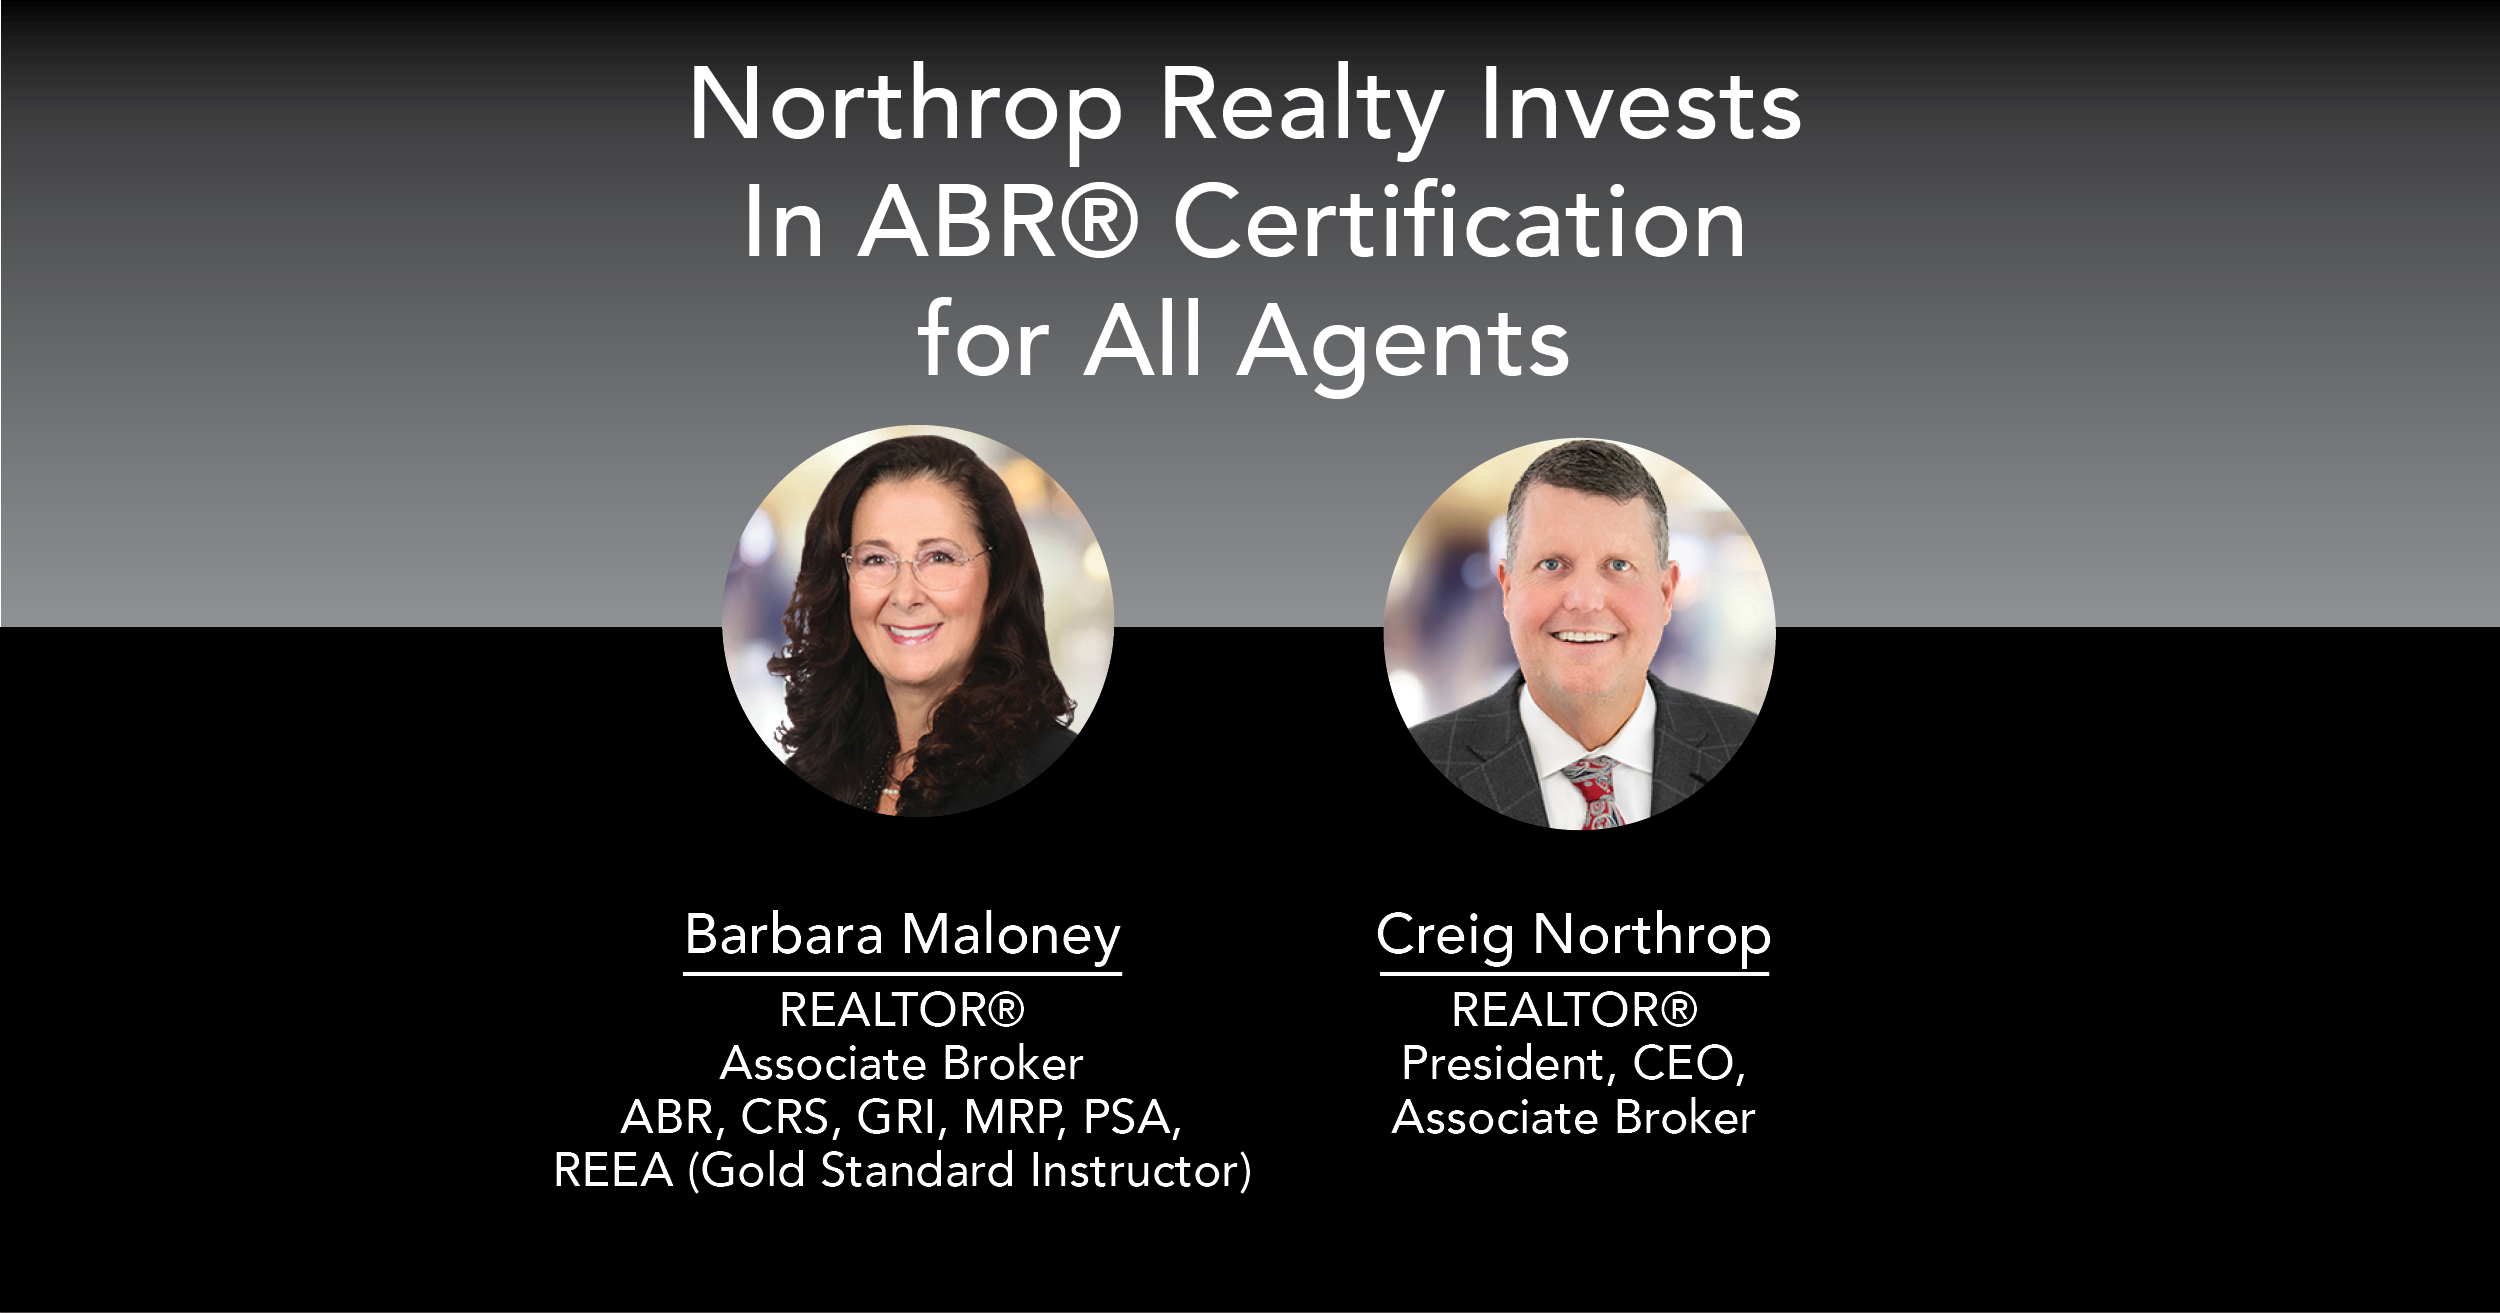 Press Release: Northrop Realty Invests In ABR® Certification for All Agents